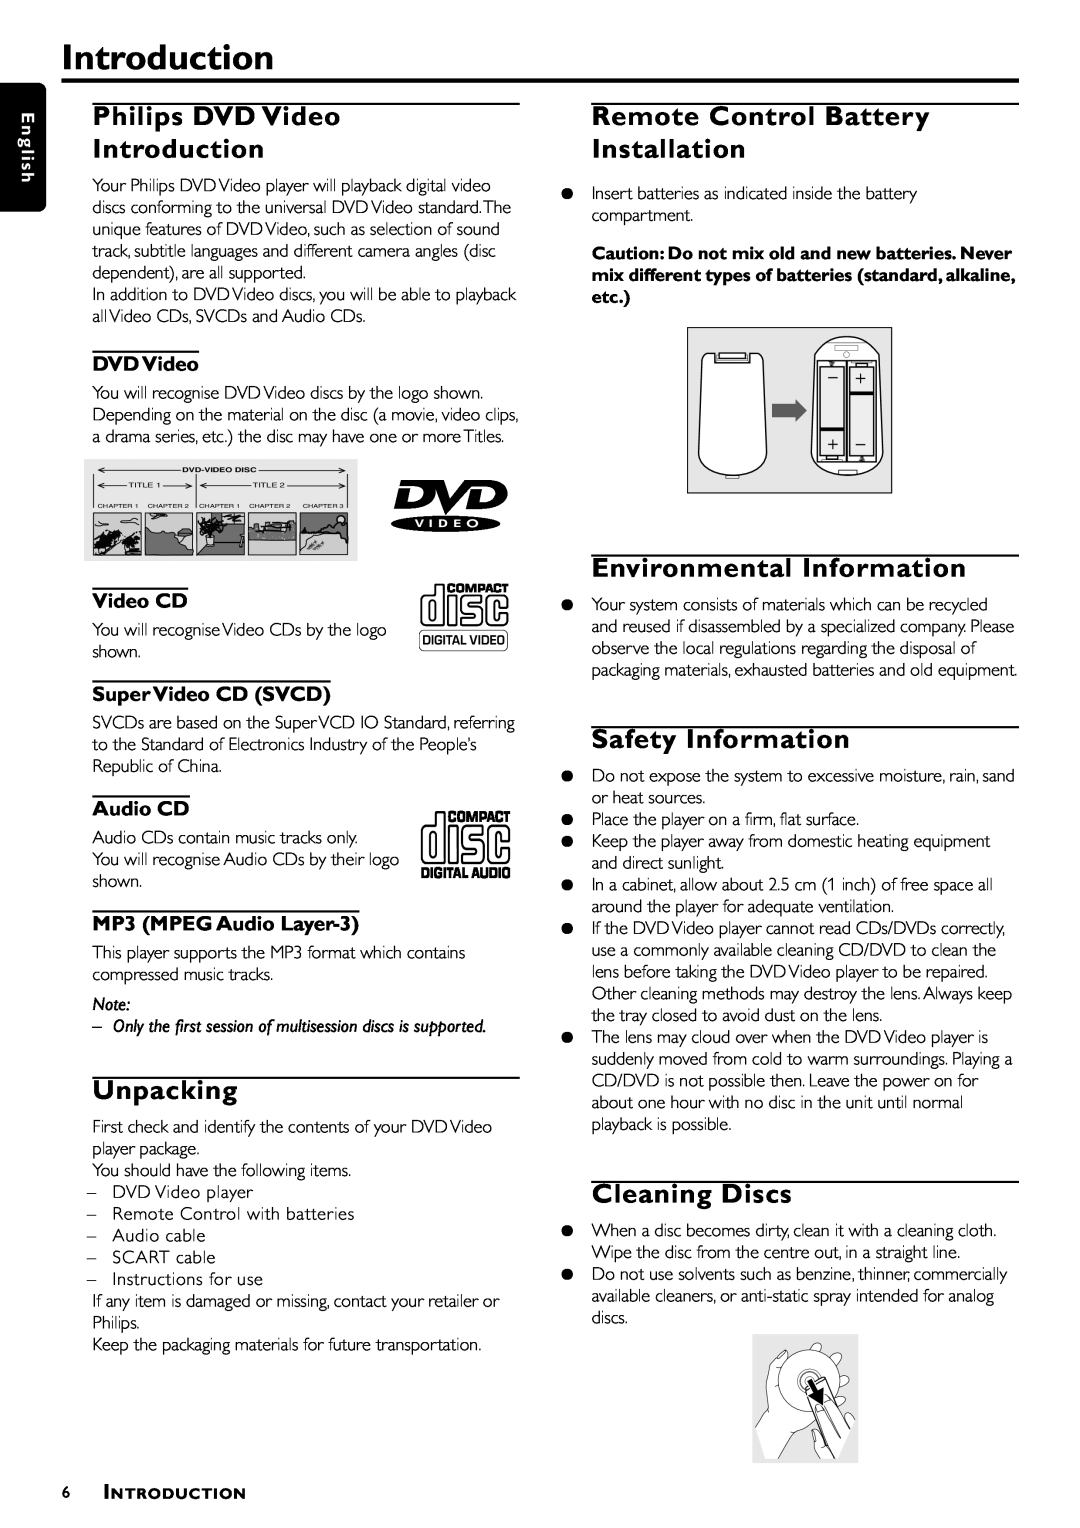 Philips DVD870P/021 Philips DVD Video Introduction, Remote Control Battery Installation, Environmental Information 